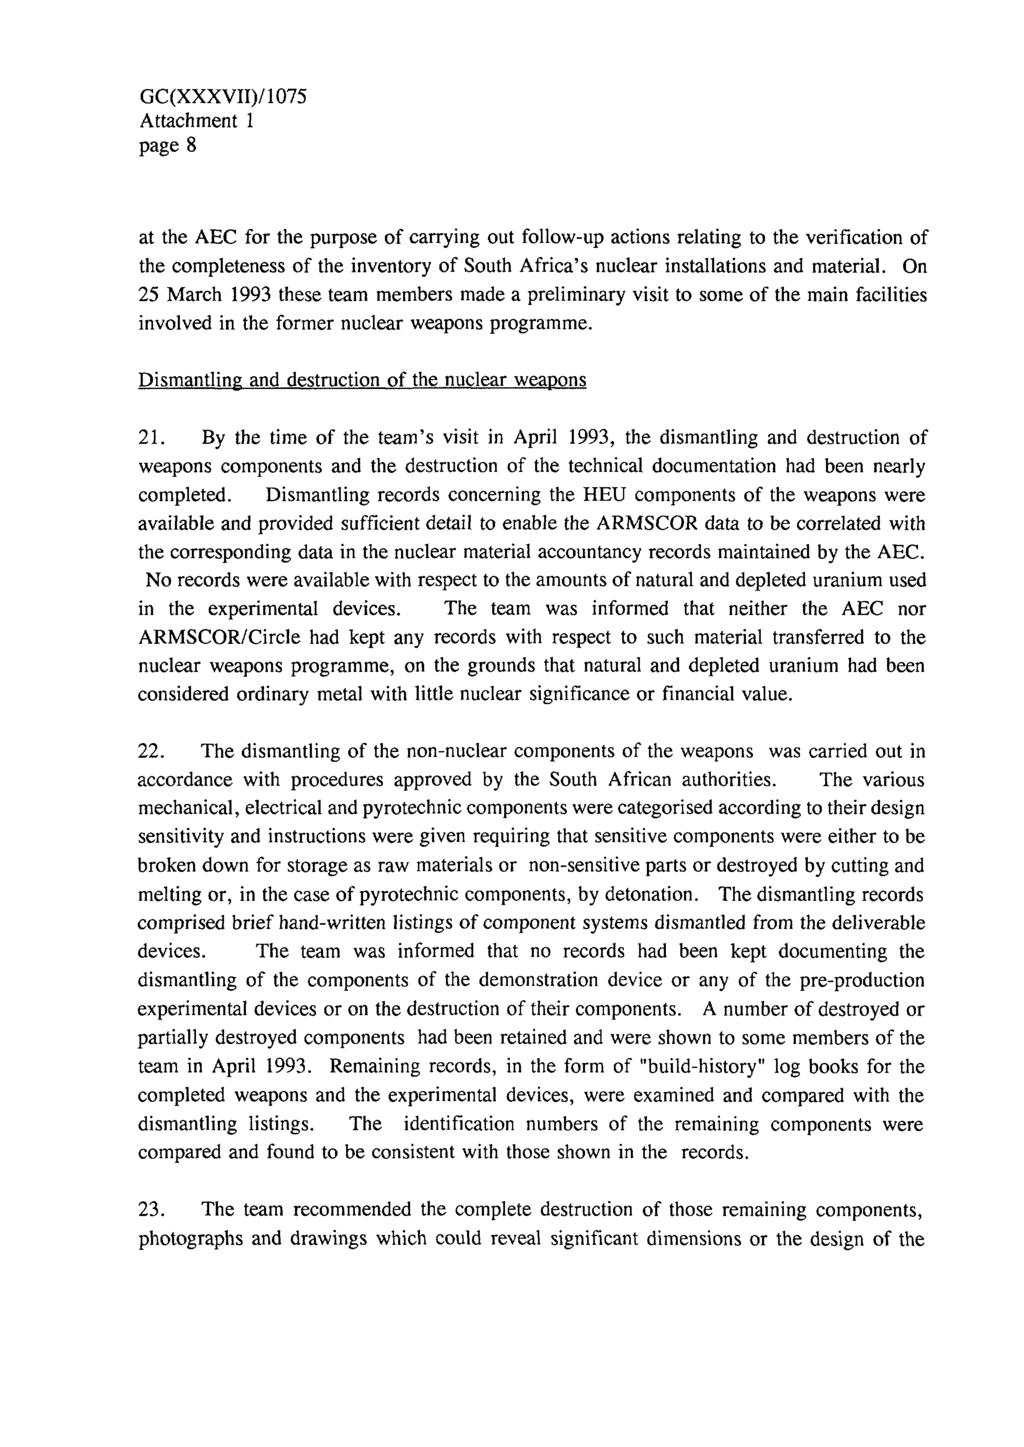 page 8 at the AEC for the purpose of carrying out follow-up actions relating to the verification of the completeness of the inventory of South Africa's nuclear installations and material.